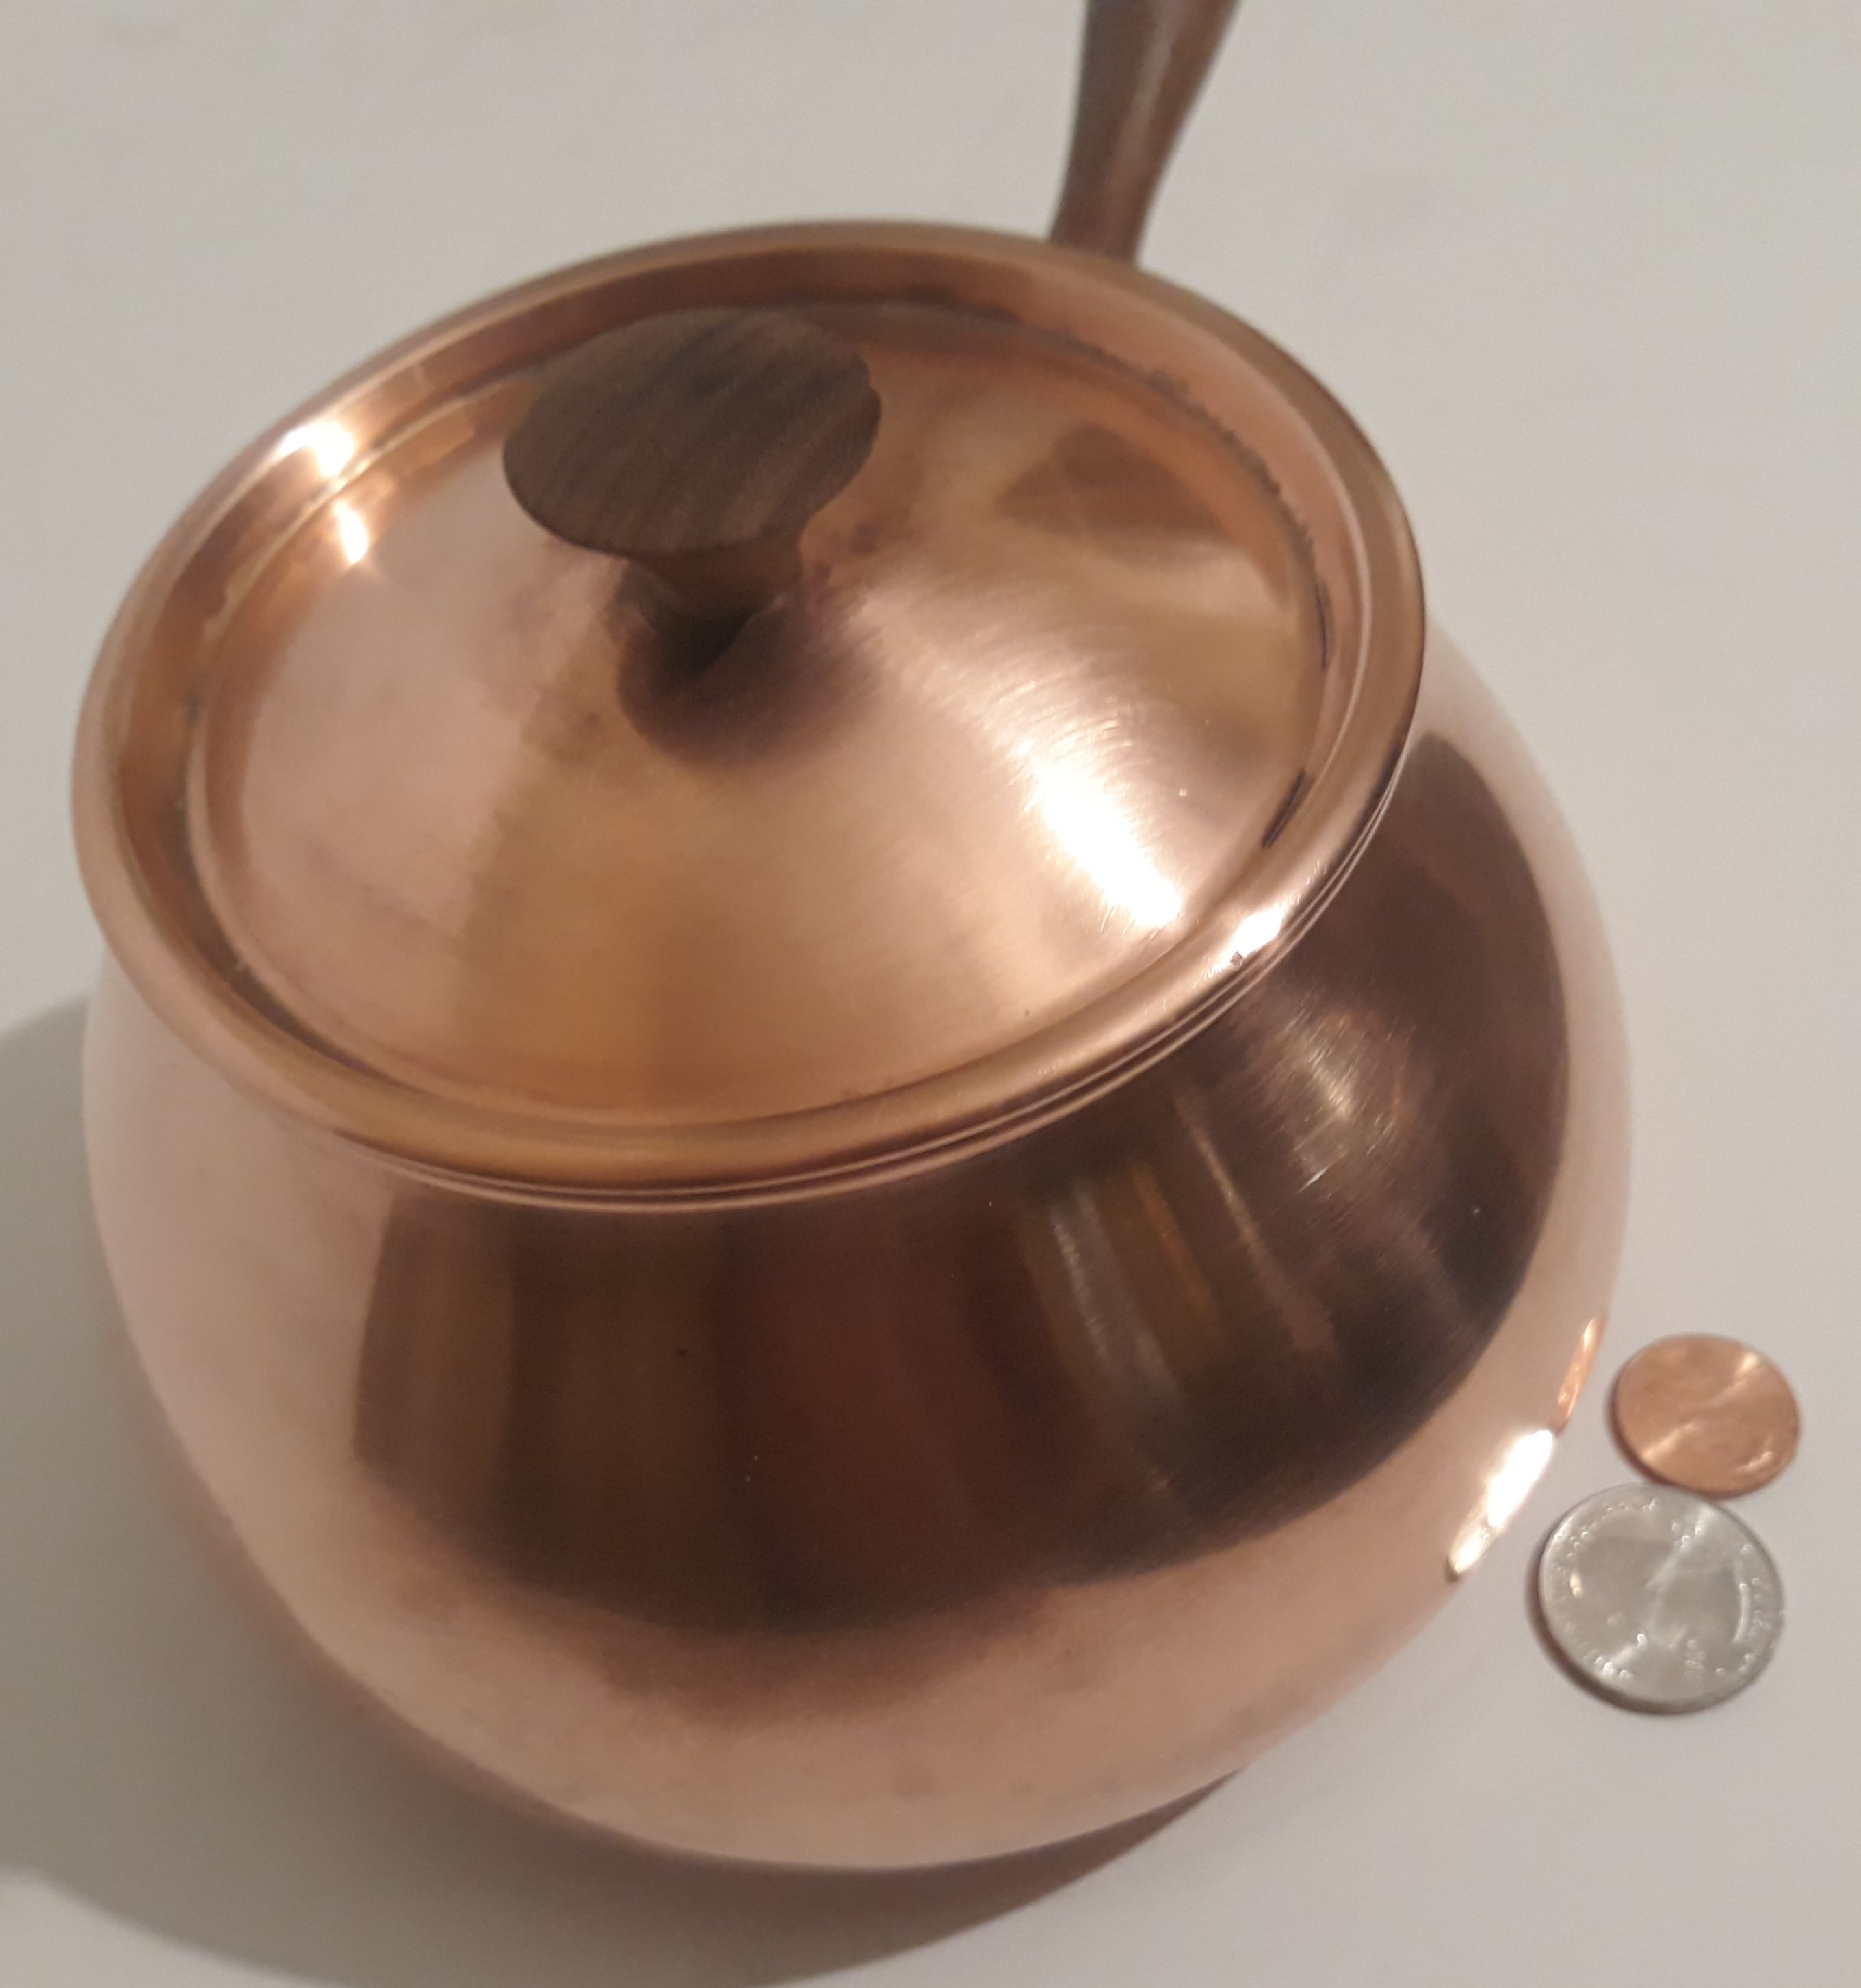 Vintage Metal Copper and Brass Cooking Pot, Lid, Wooden Handle, Made in Portugal, 11" Long and 6" x 3 1/2" Pan Size, Home Decor, Shelf Display